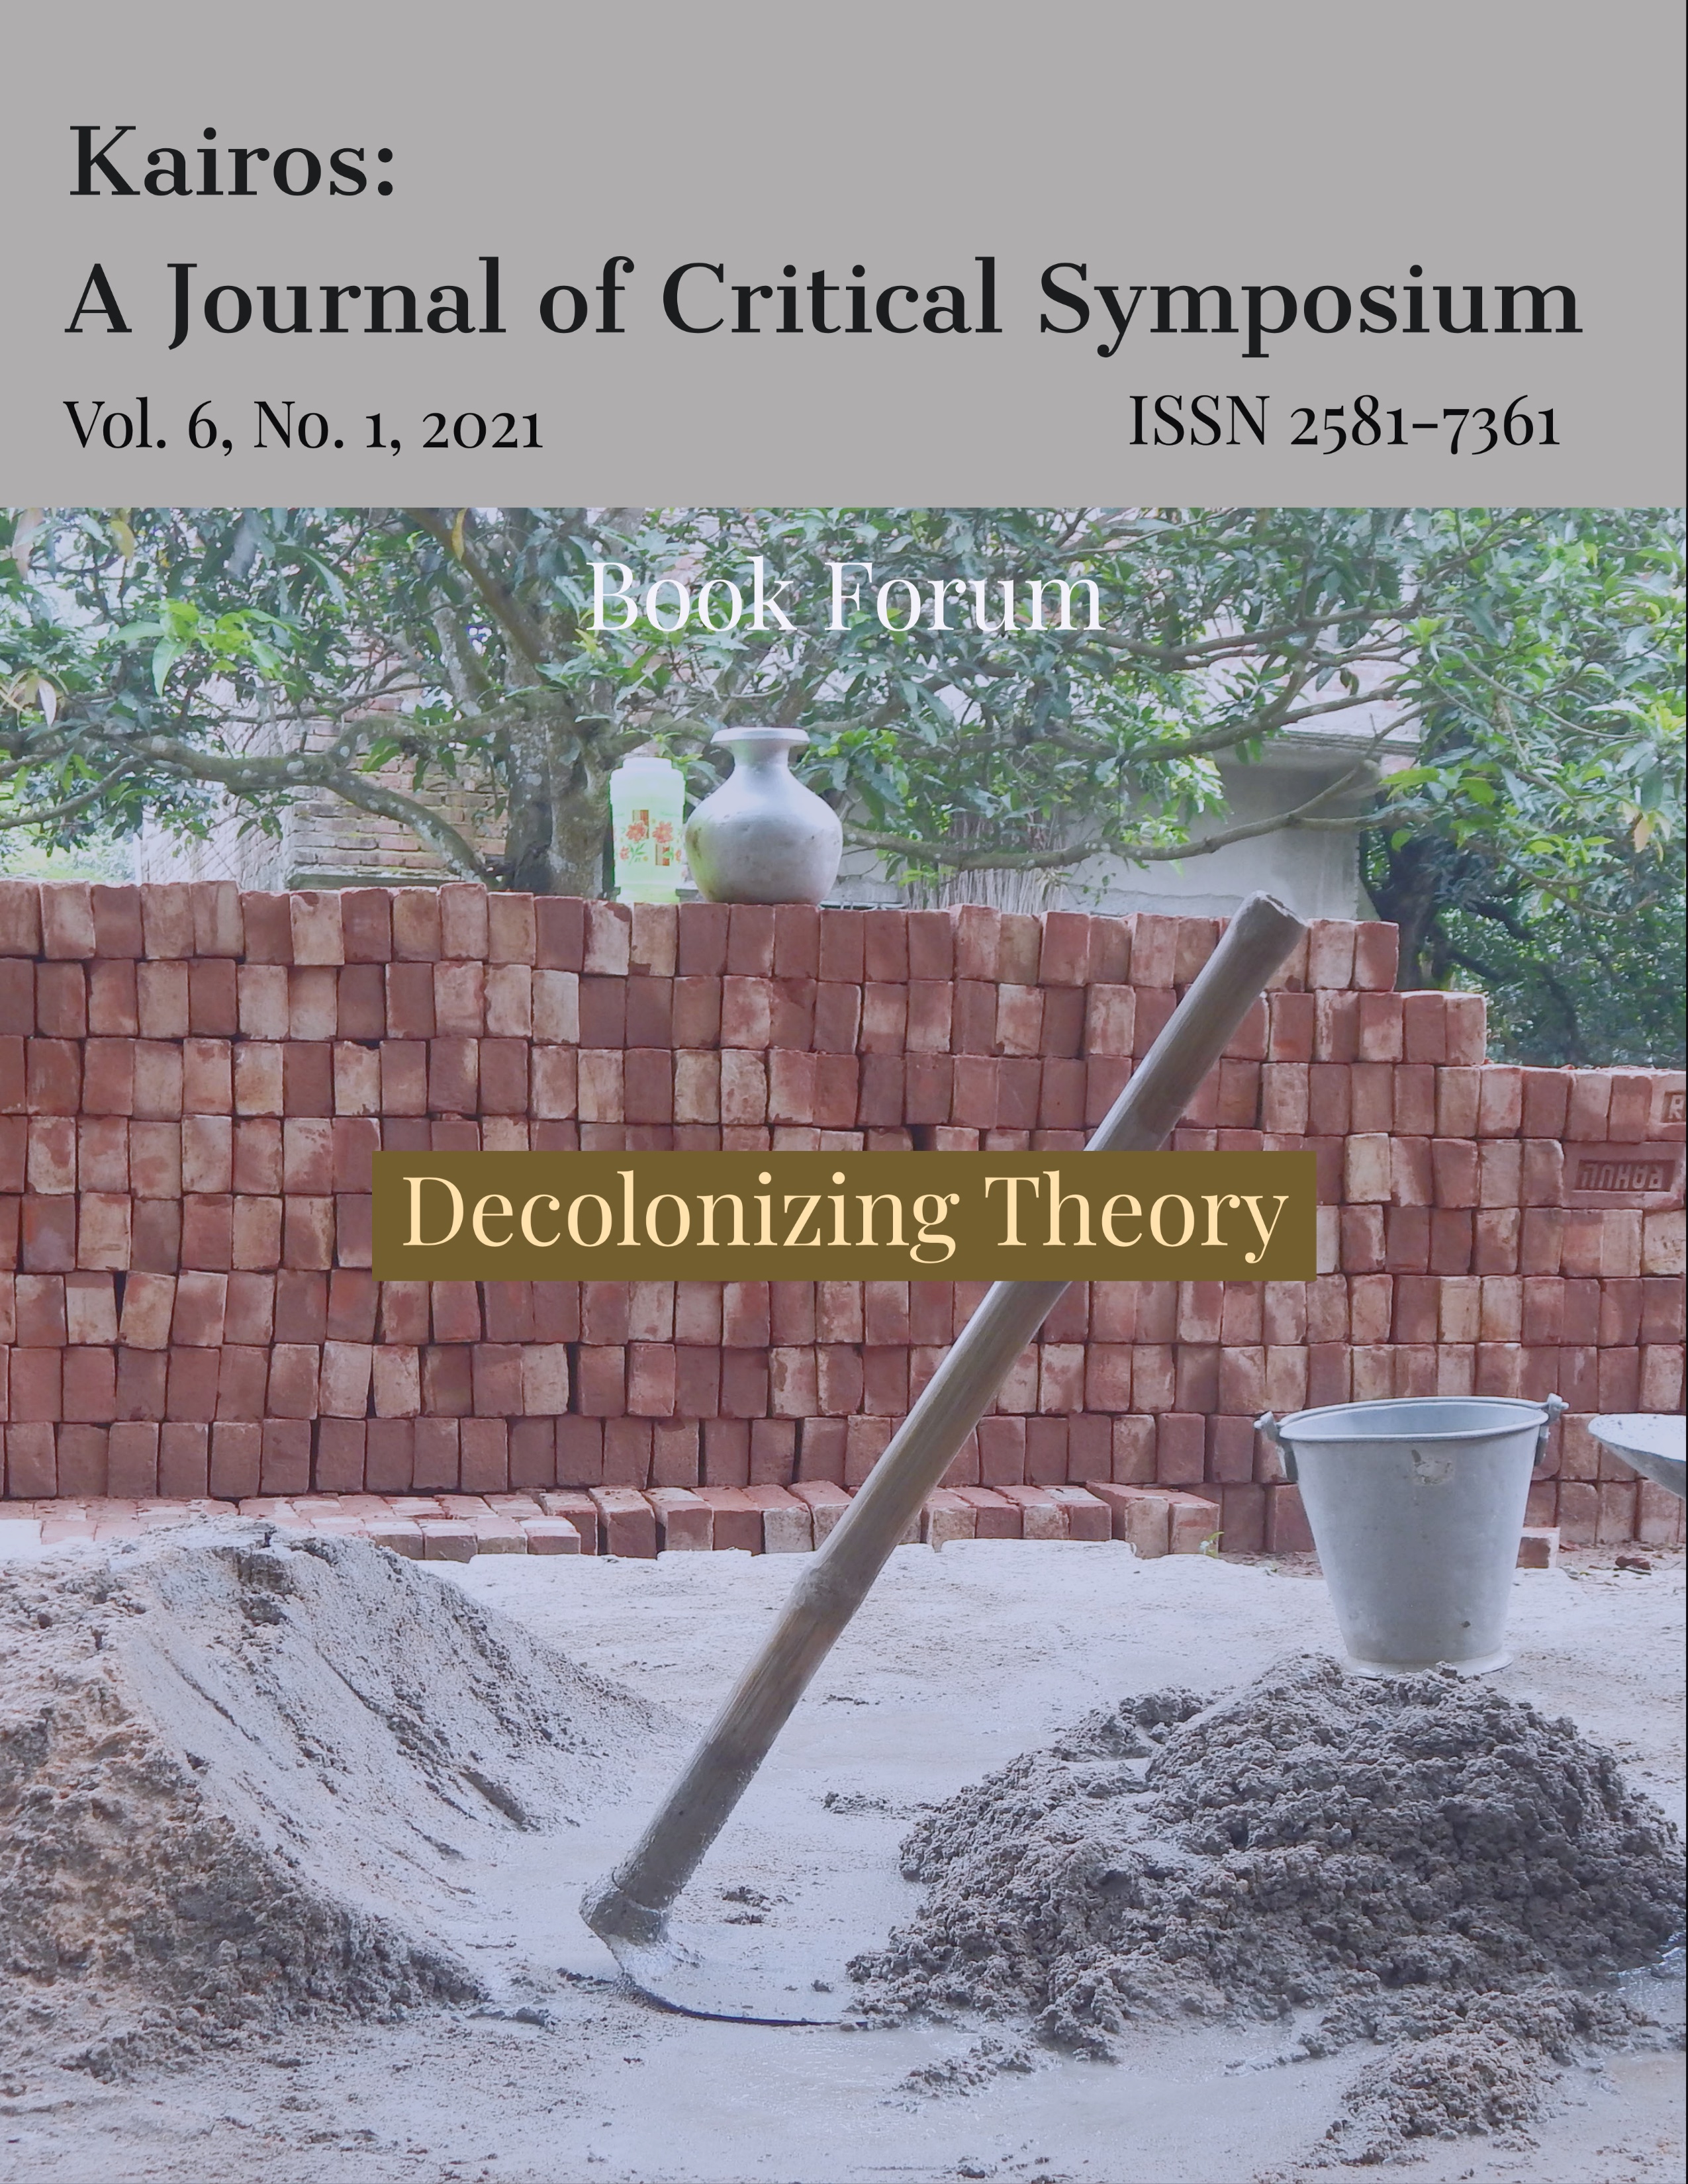 					View Vol. 6 No. 1 (2021): Book Forum: Decolonizing Theory
				